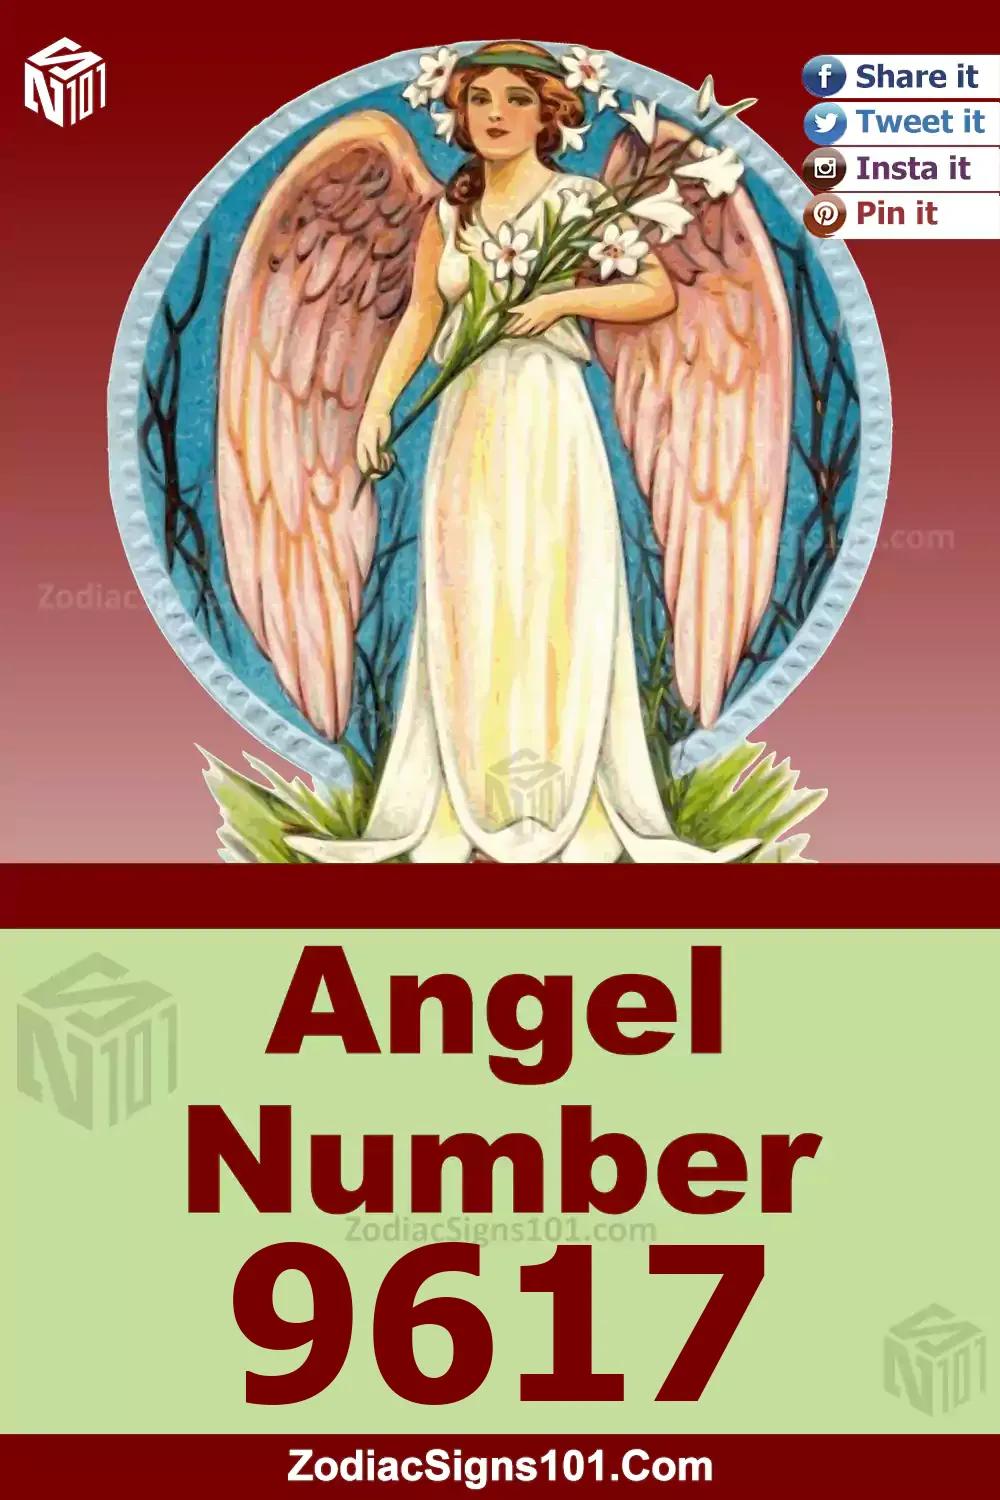 9617 Angel Number Meaning